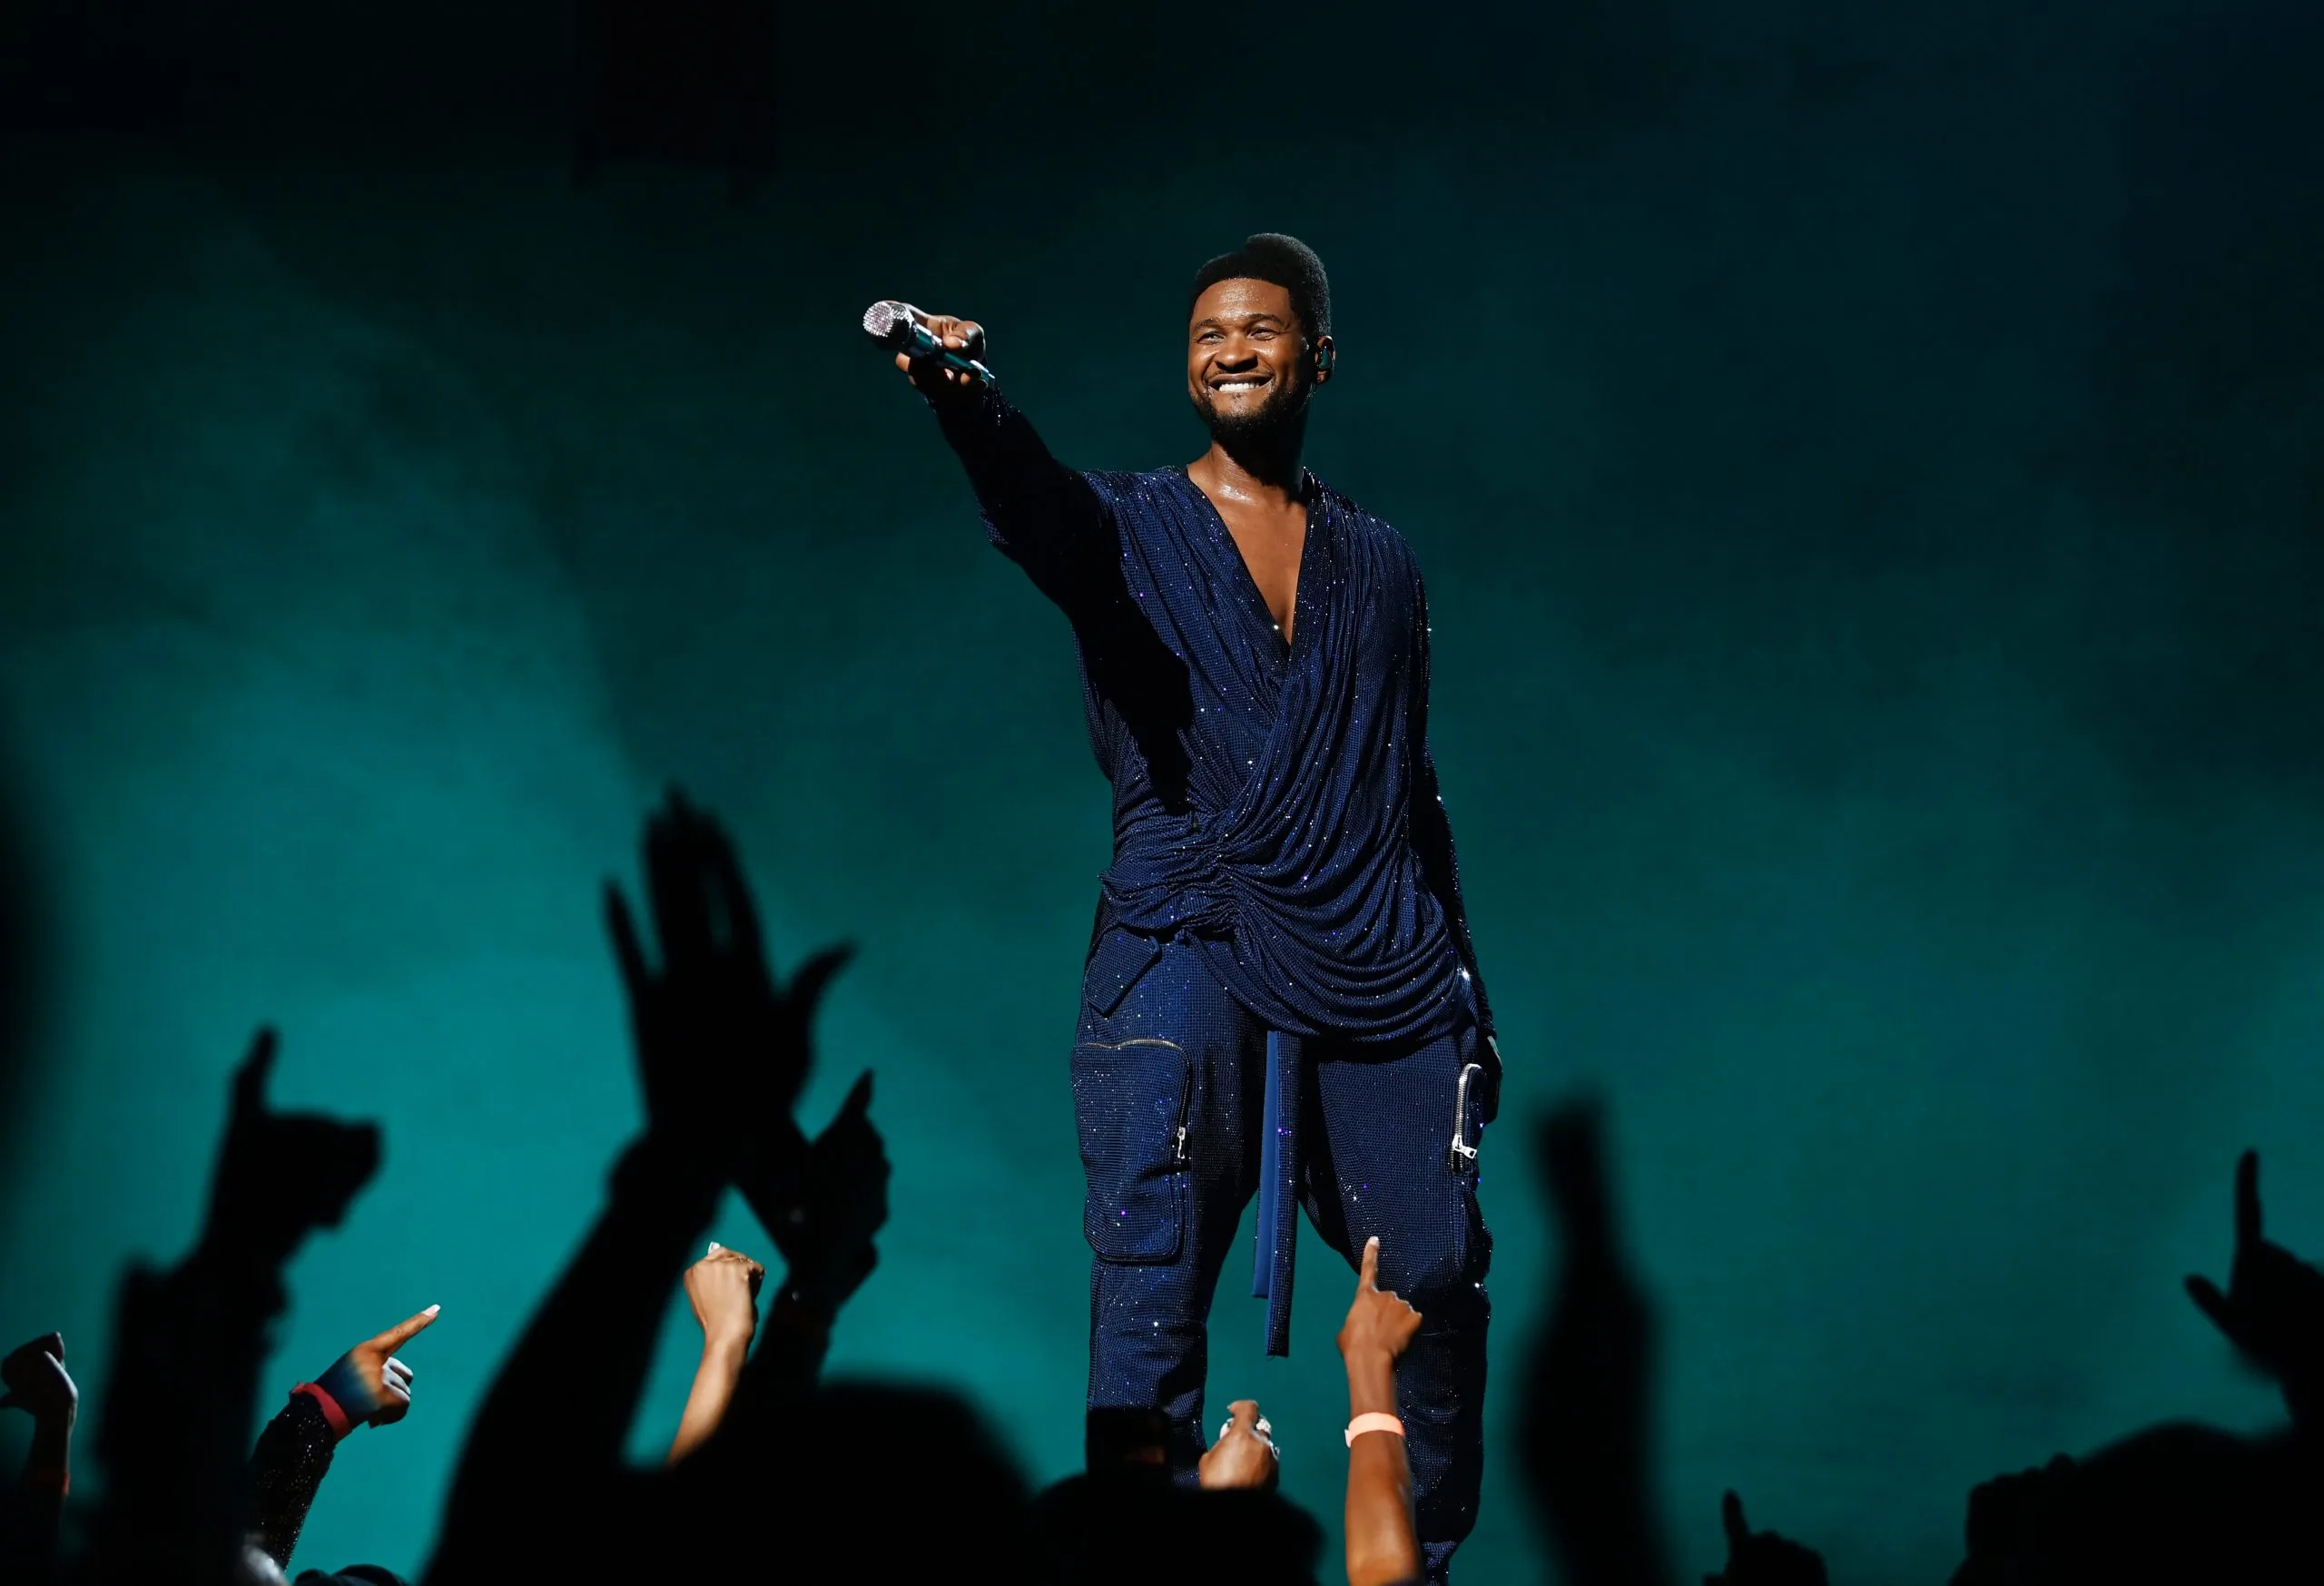 A photo of Usher performing at the Super Bowl LVIII halftime show, surrounded by a crowd of energetic dancers and illuminated by colorful stage lights.